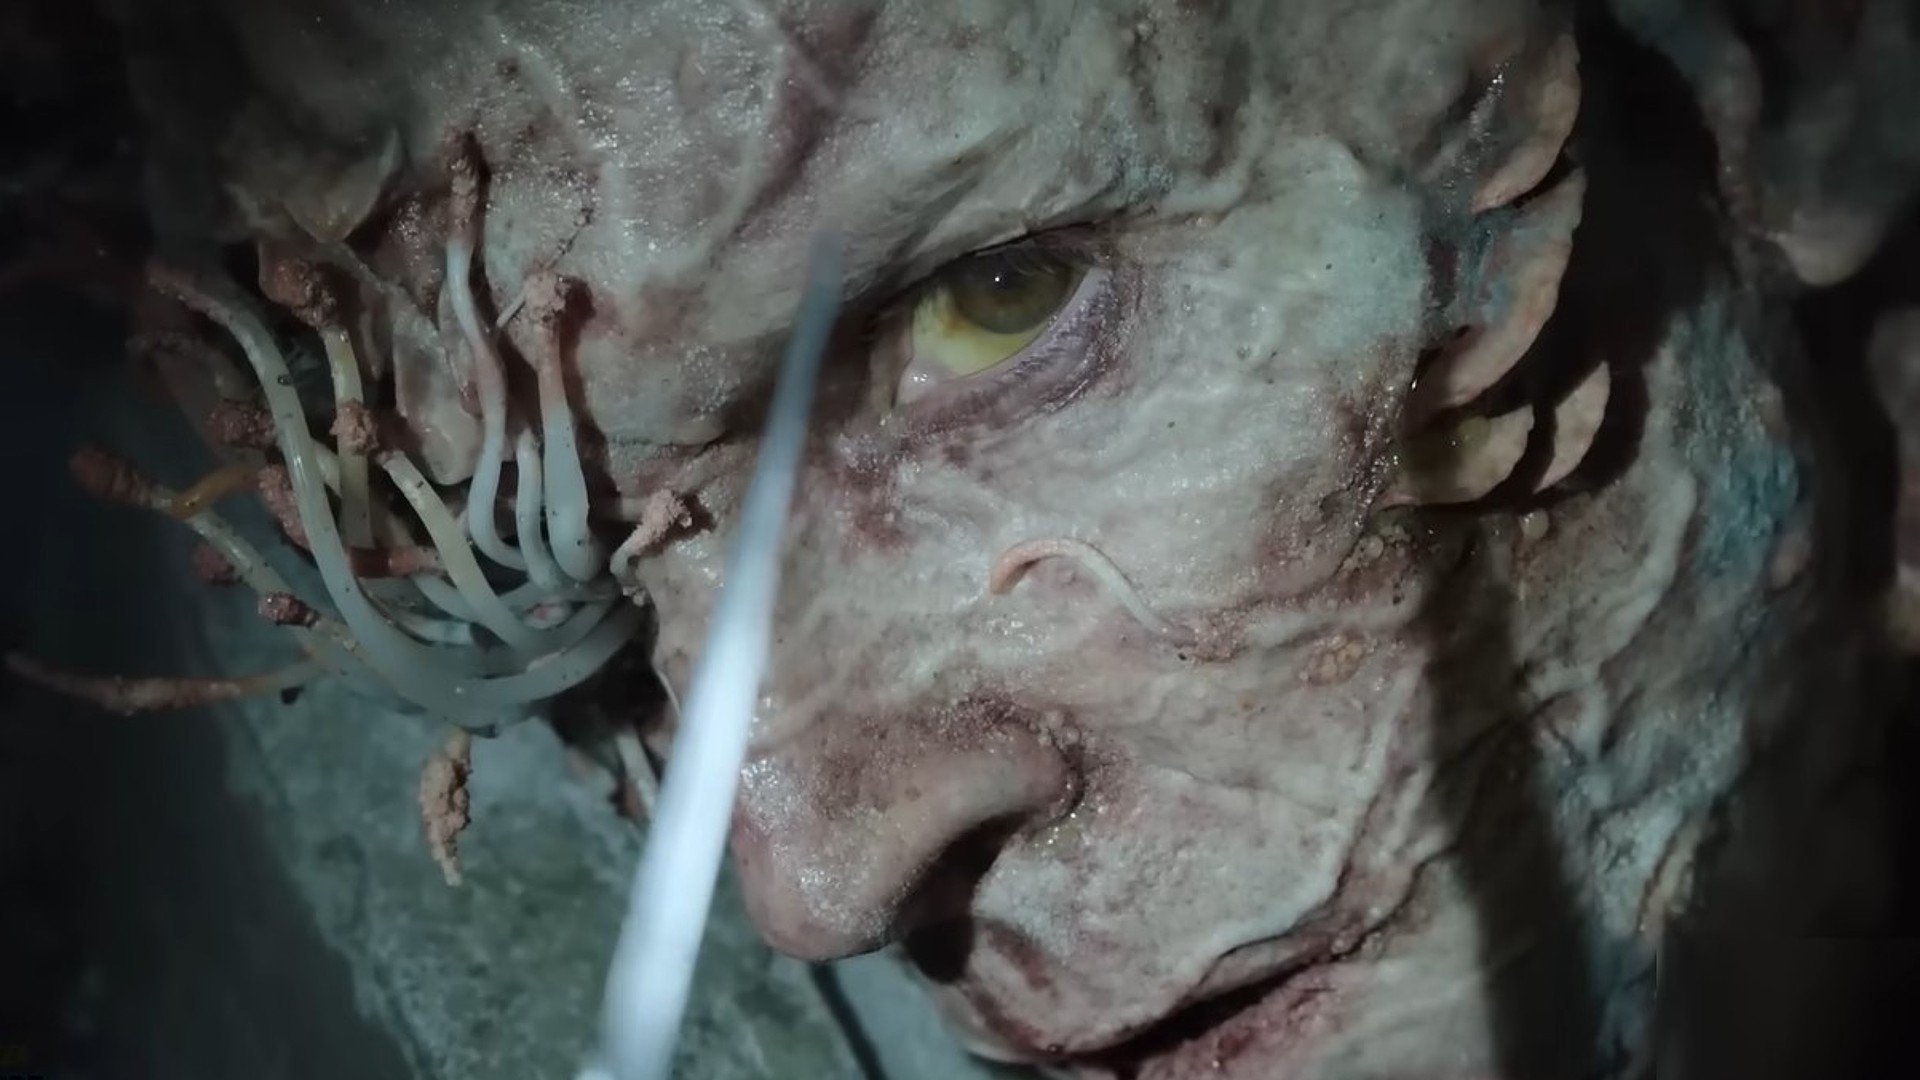 An 'Infected' from The Last of Us TV show